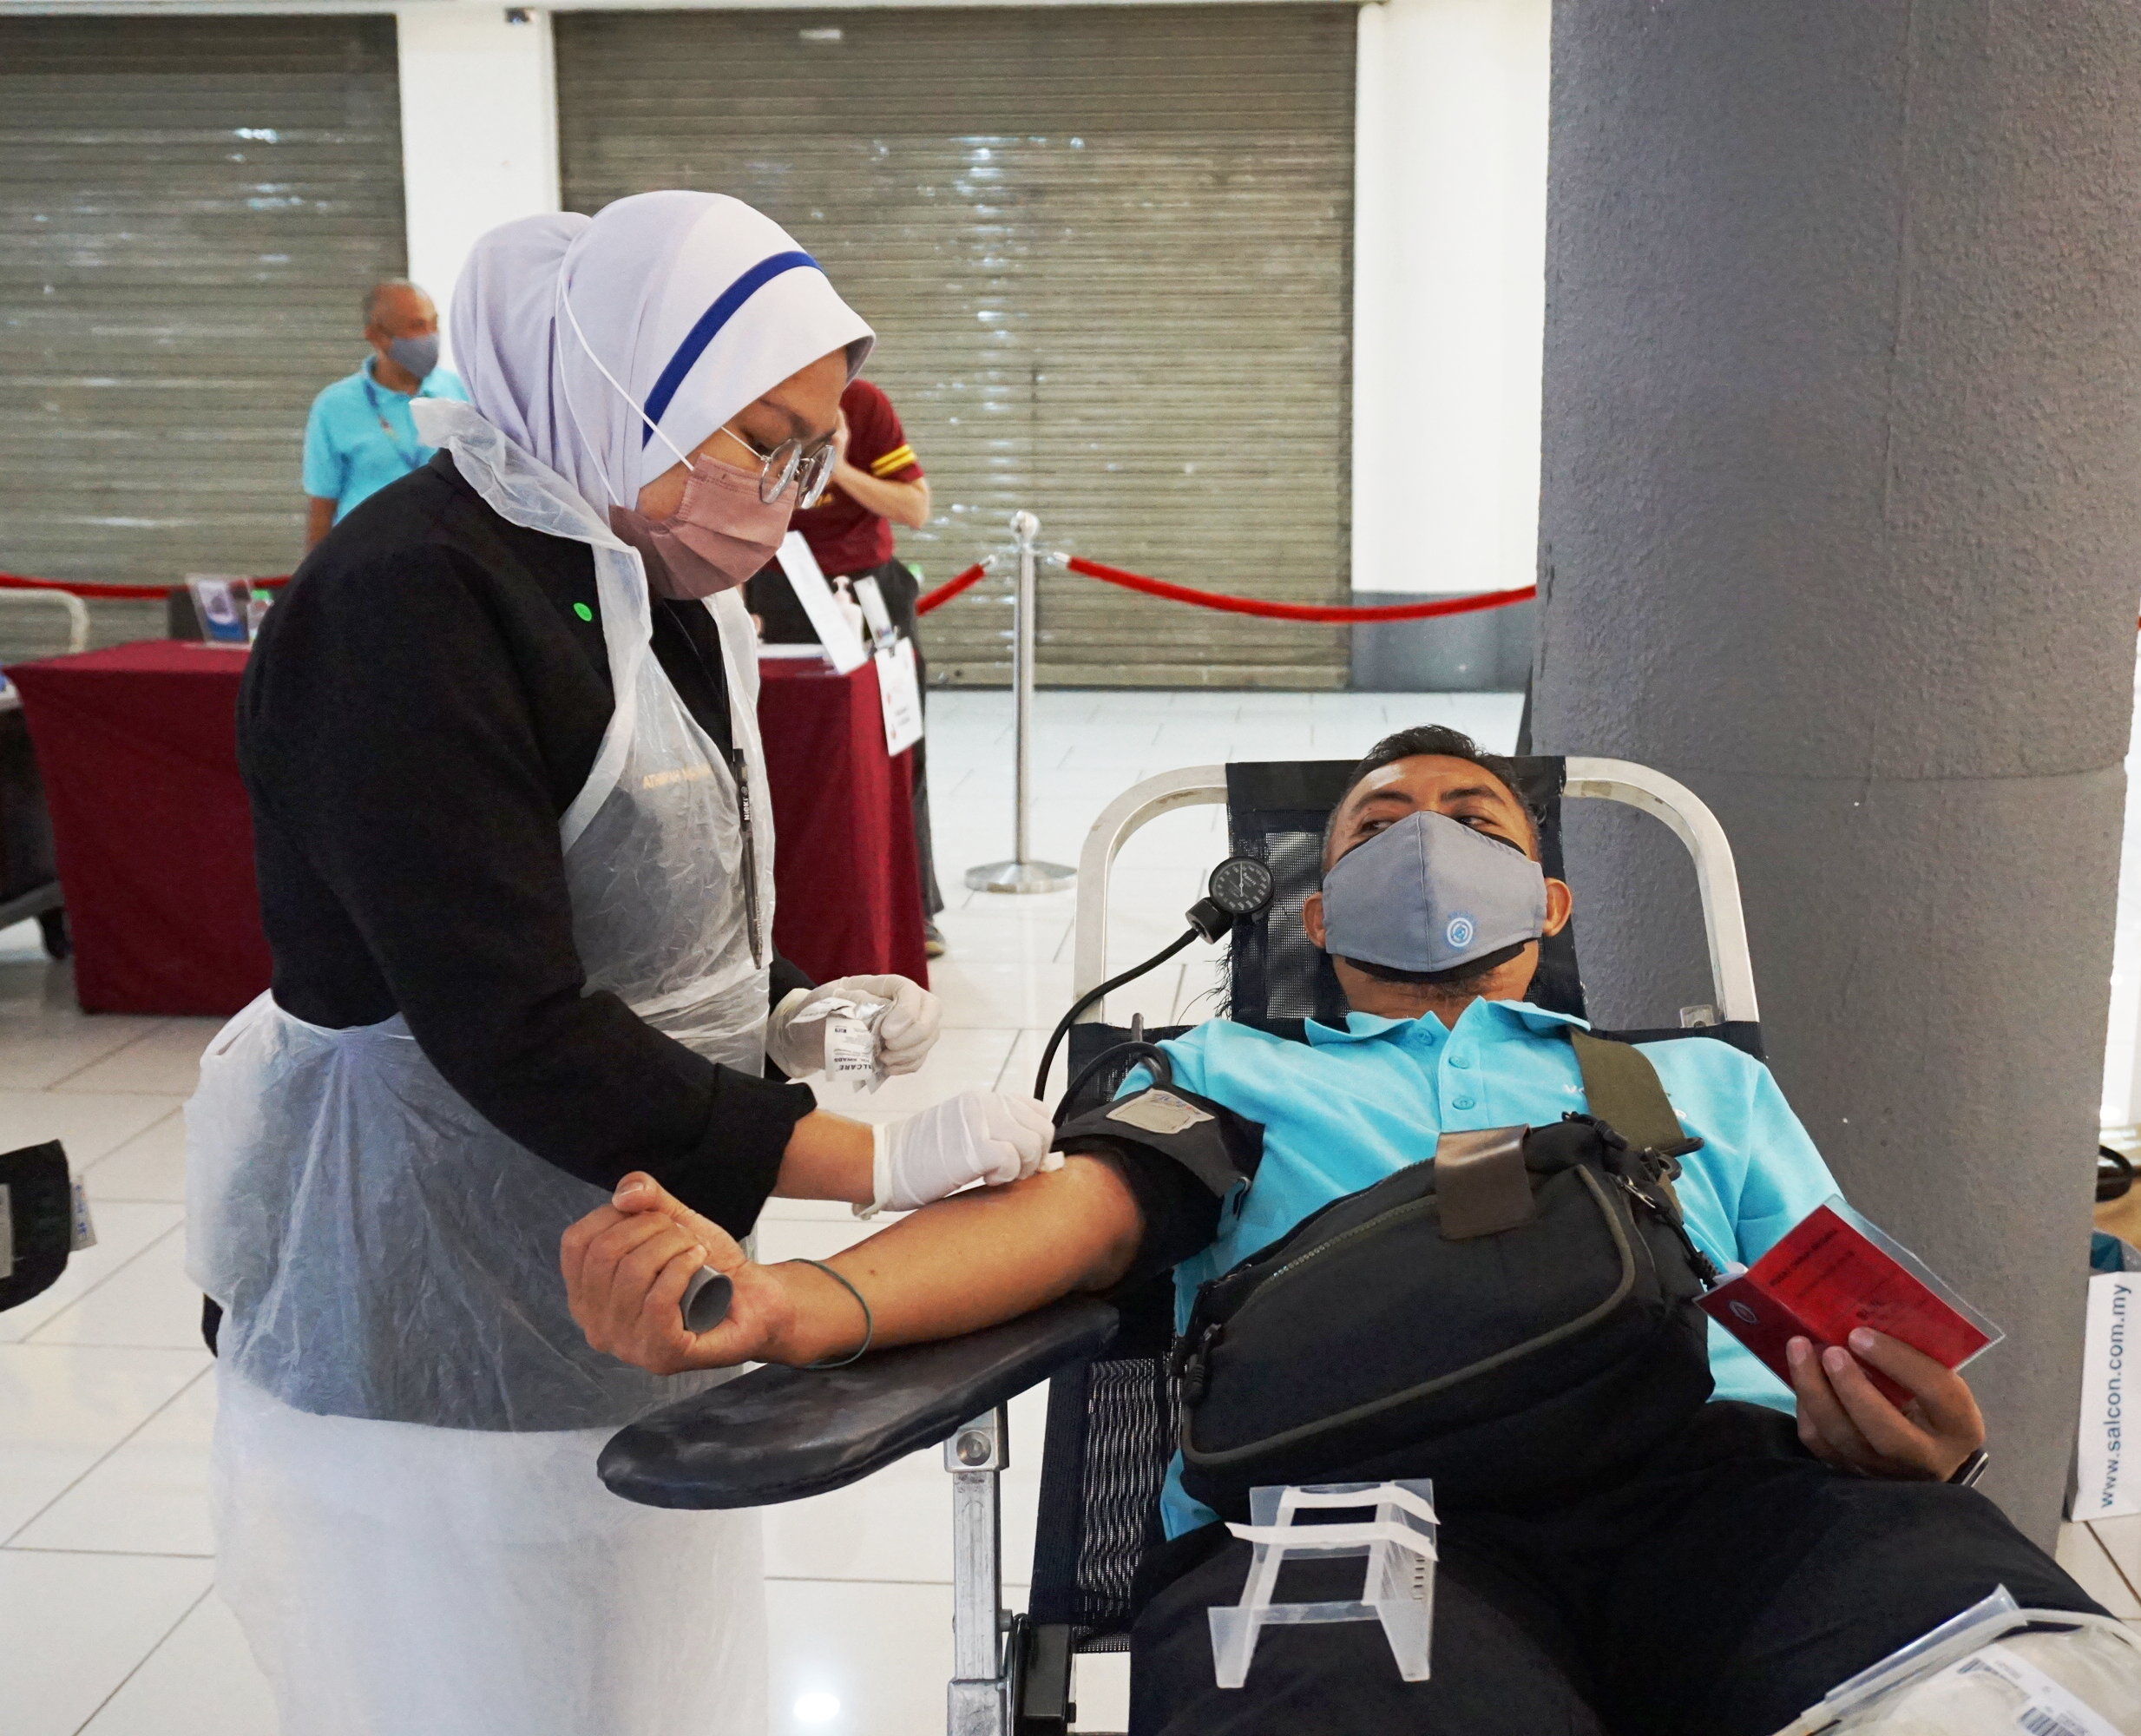 Visitors to Summit Shopping Mall donating blood at the Salcon Blood Donation Drive